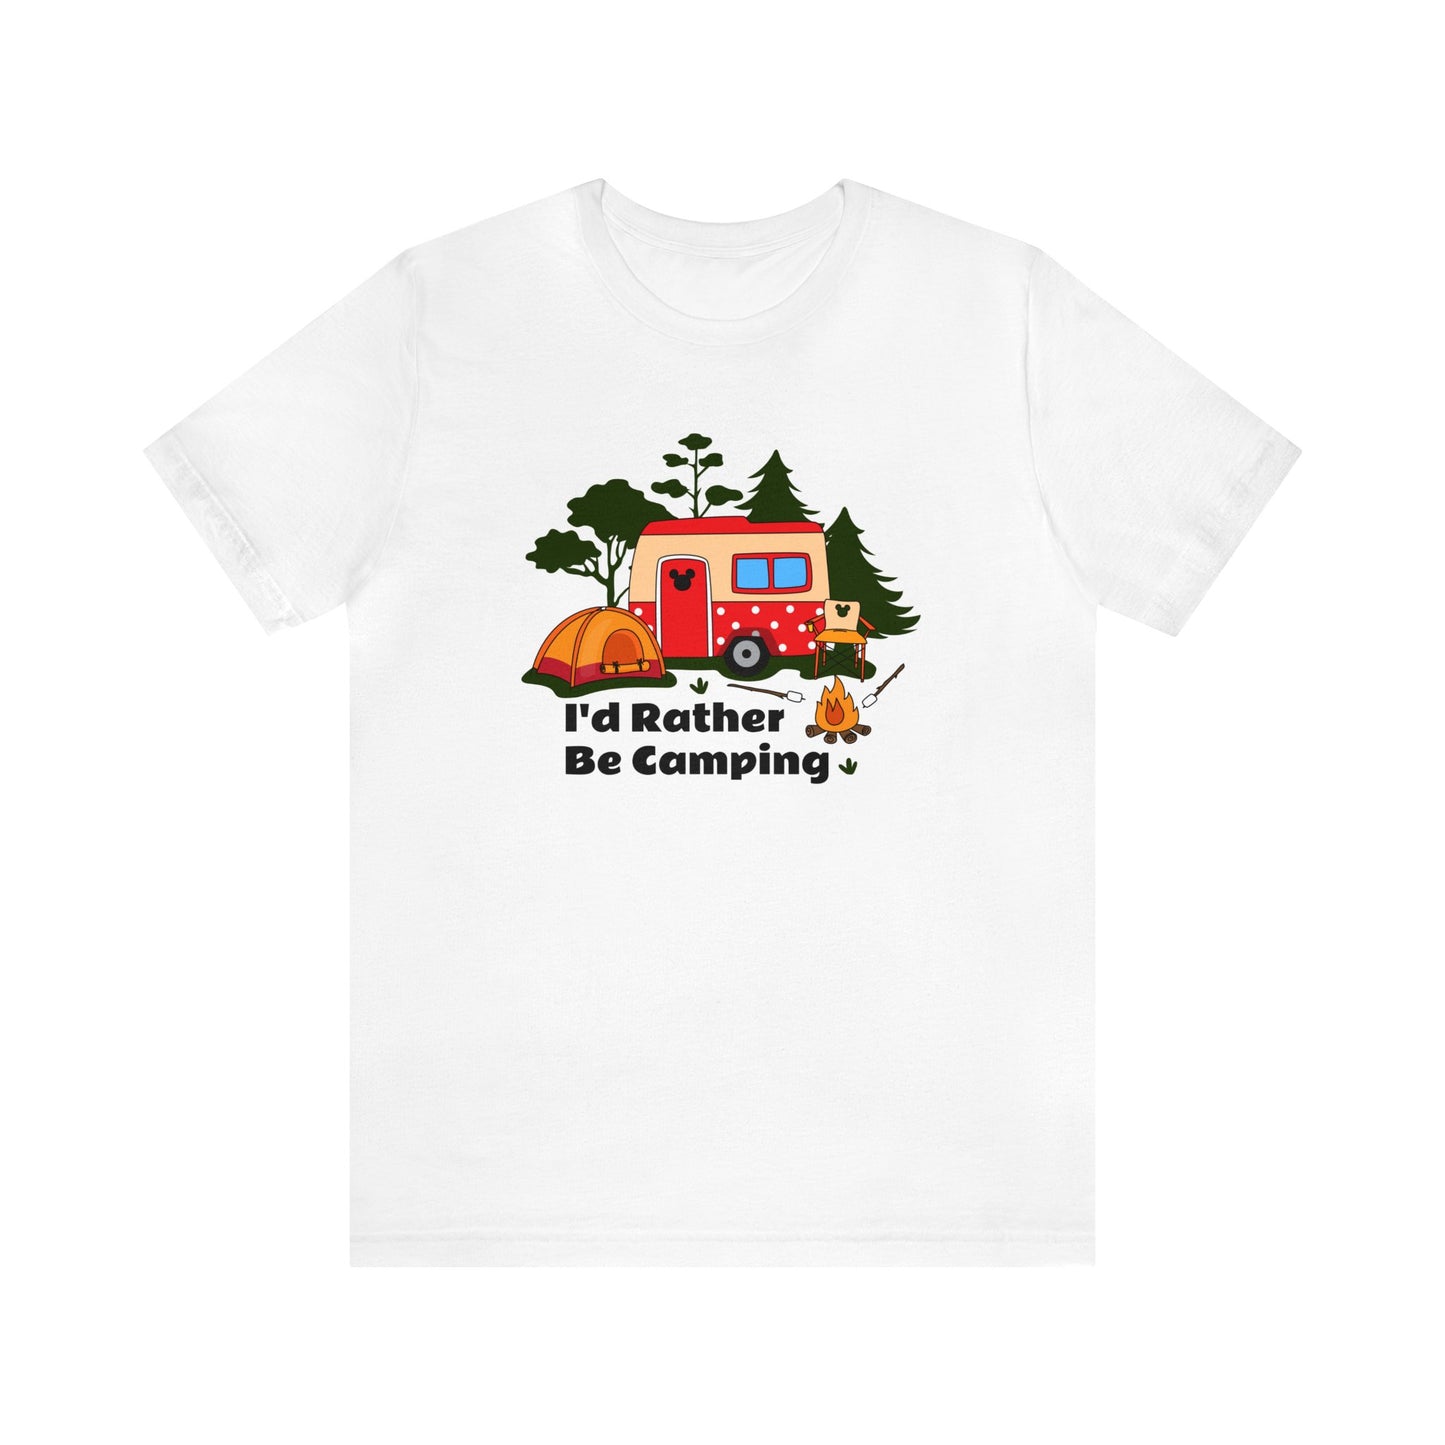 I'd Rather Be Camping Unisex Graphic Tee